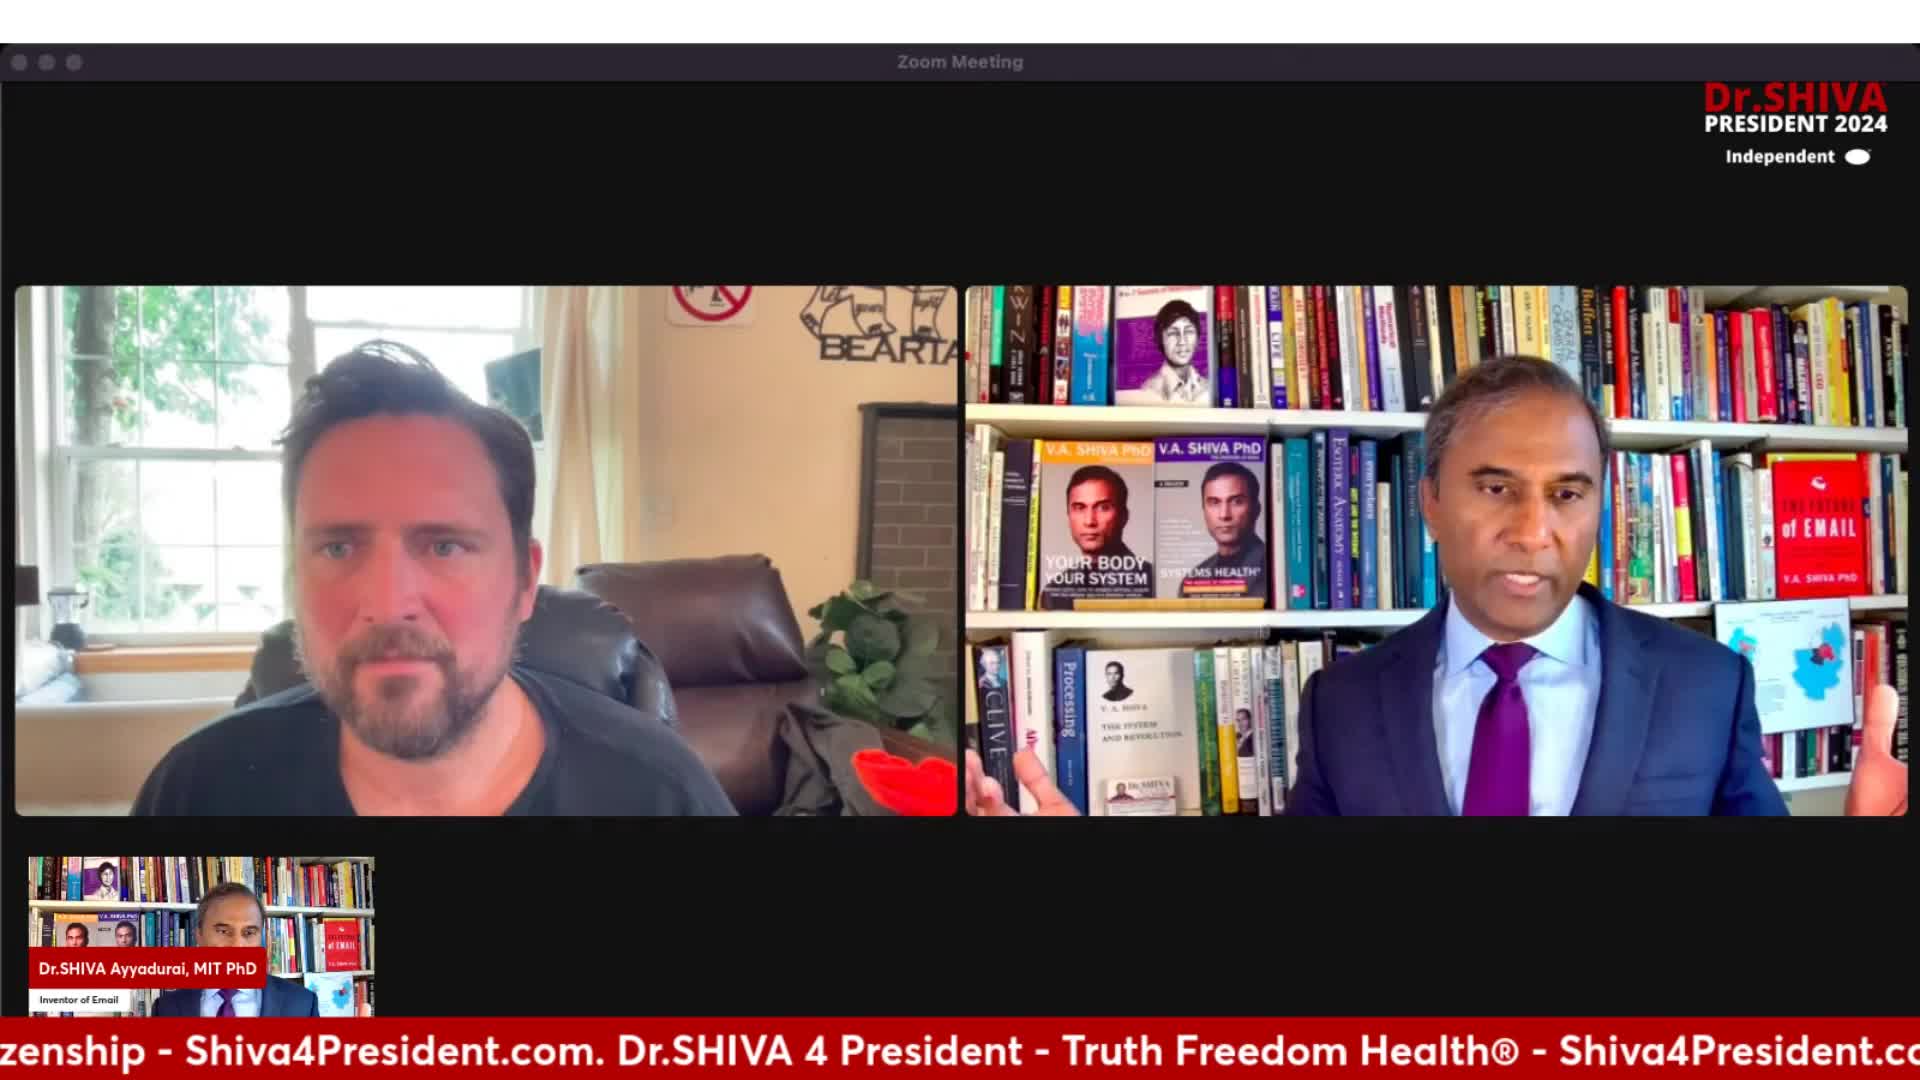 Dr.SHIVA LIVE: Booby Kennedy Is Backed By Billionaires, Who Made Trillions From Pandemic Lockdowns.